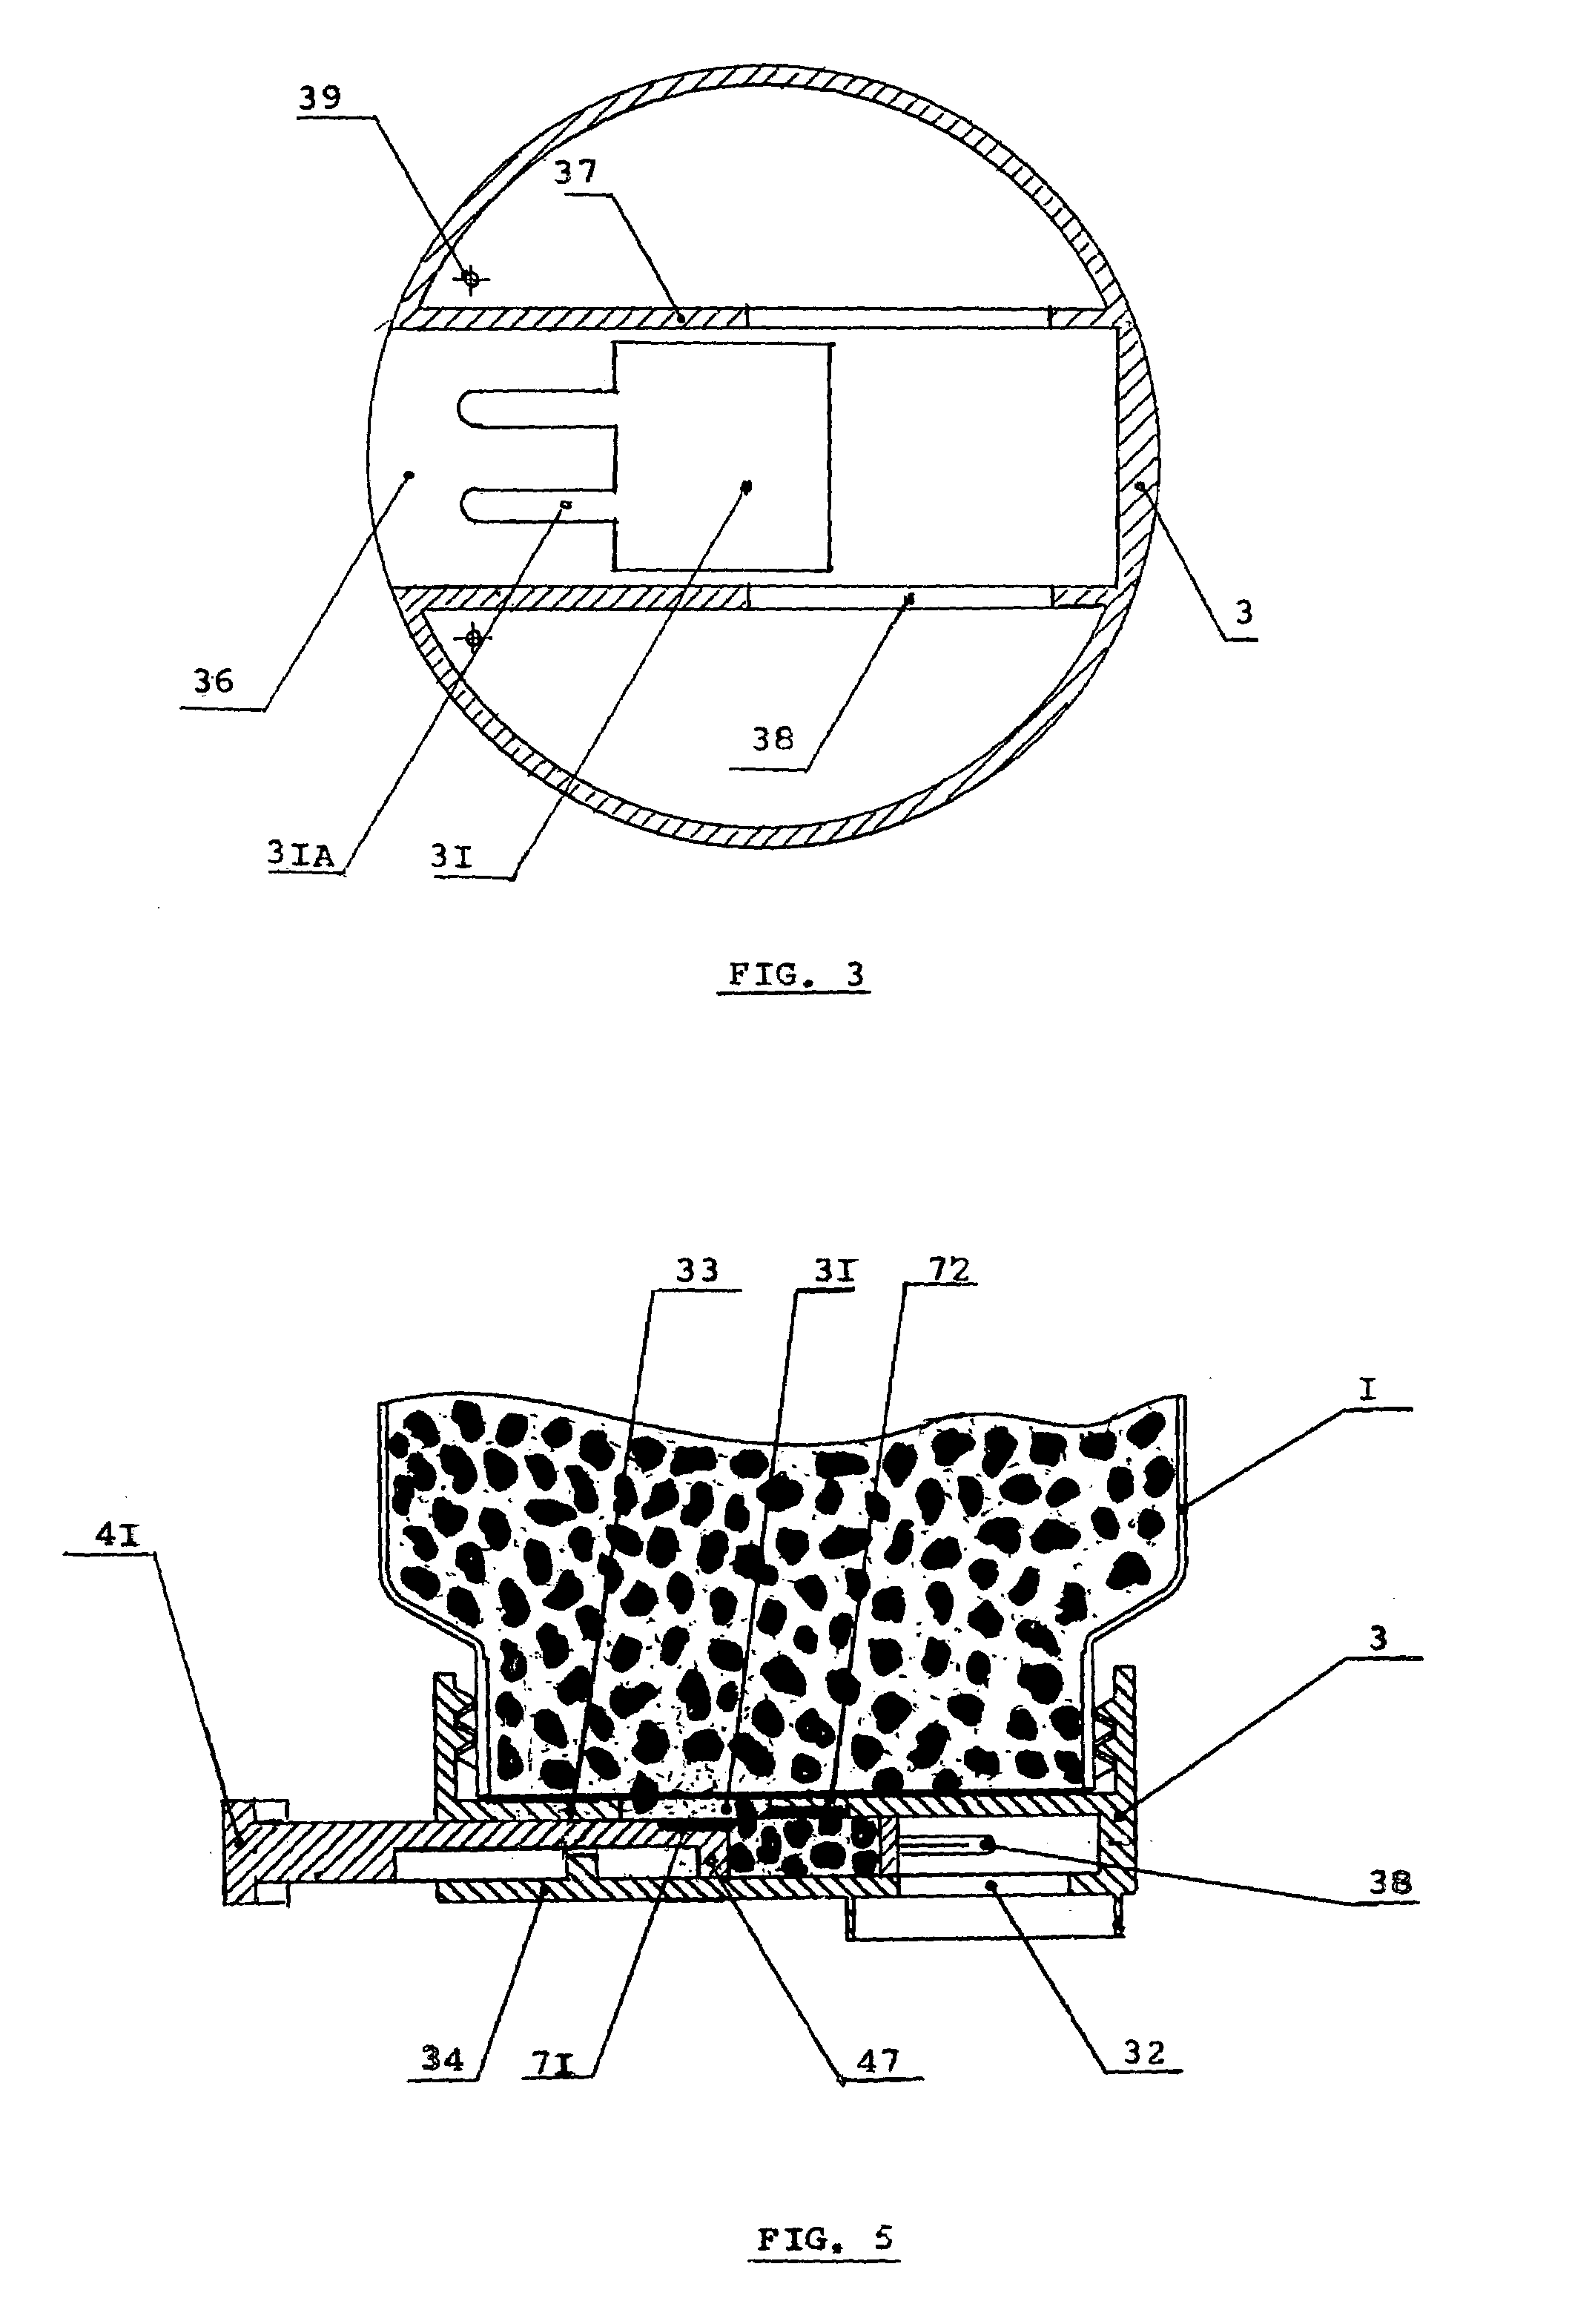 Device for measuring, dispensing and storing of granular, powder and grain materials